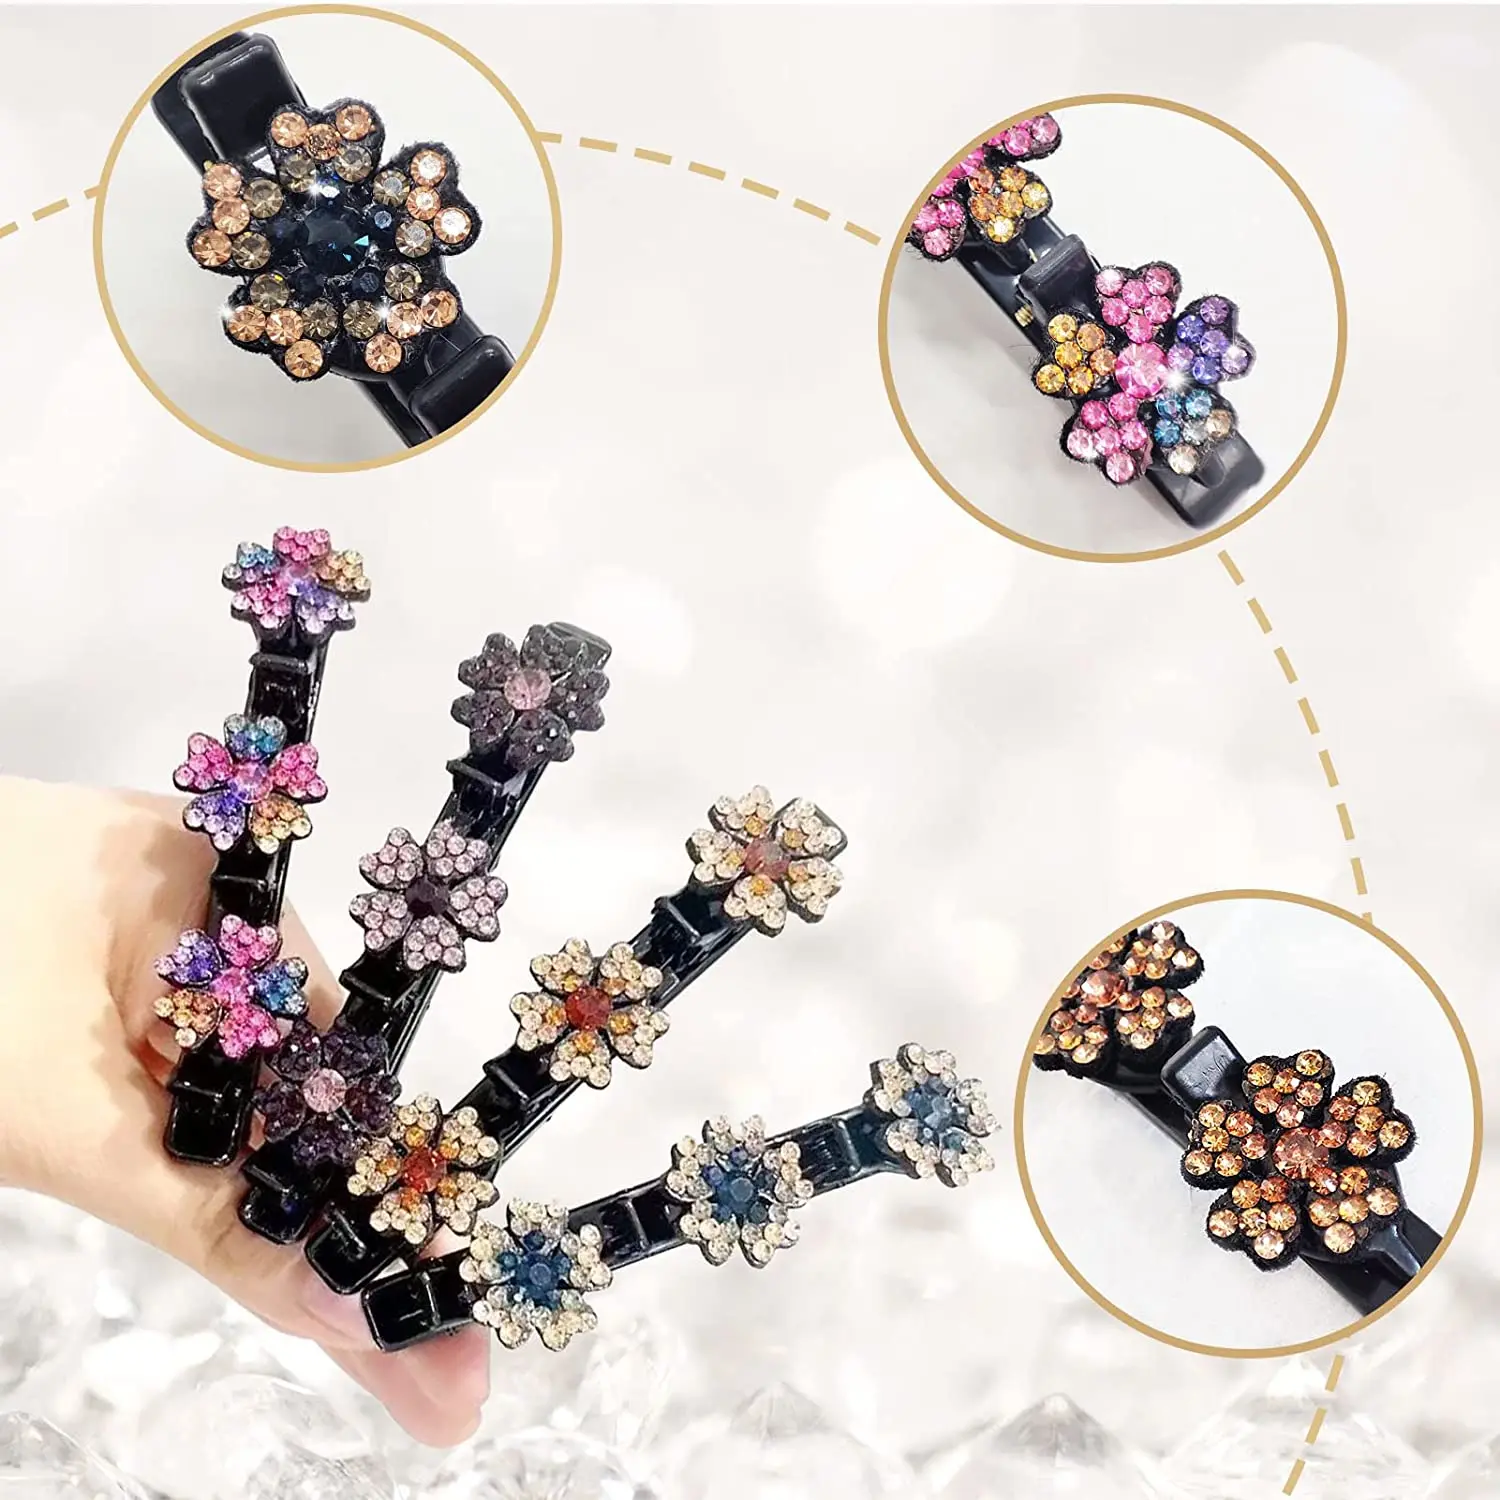 Sparkly Crystal Stone Flower Braided Hair Clips with 3 in 1 Clips Set Barrettes for Women Girls Ins Fashion Hair Styling Jewery images - 6